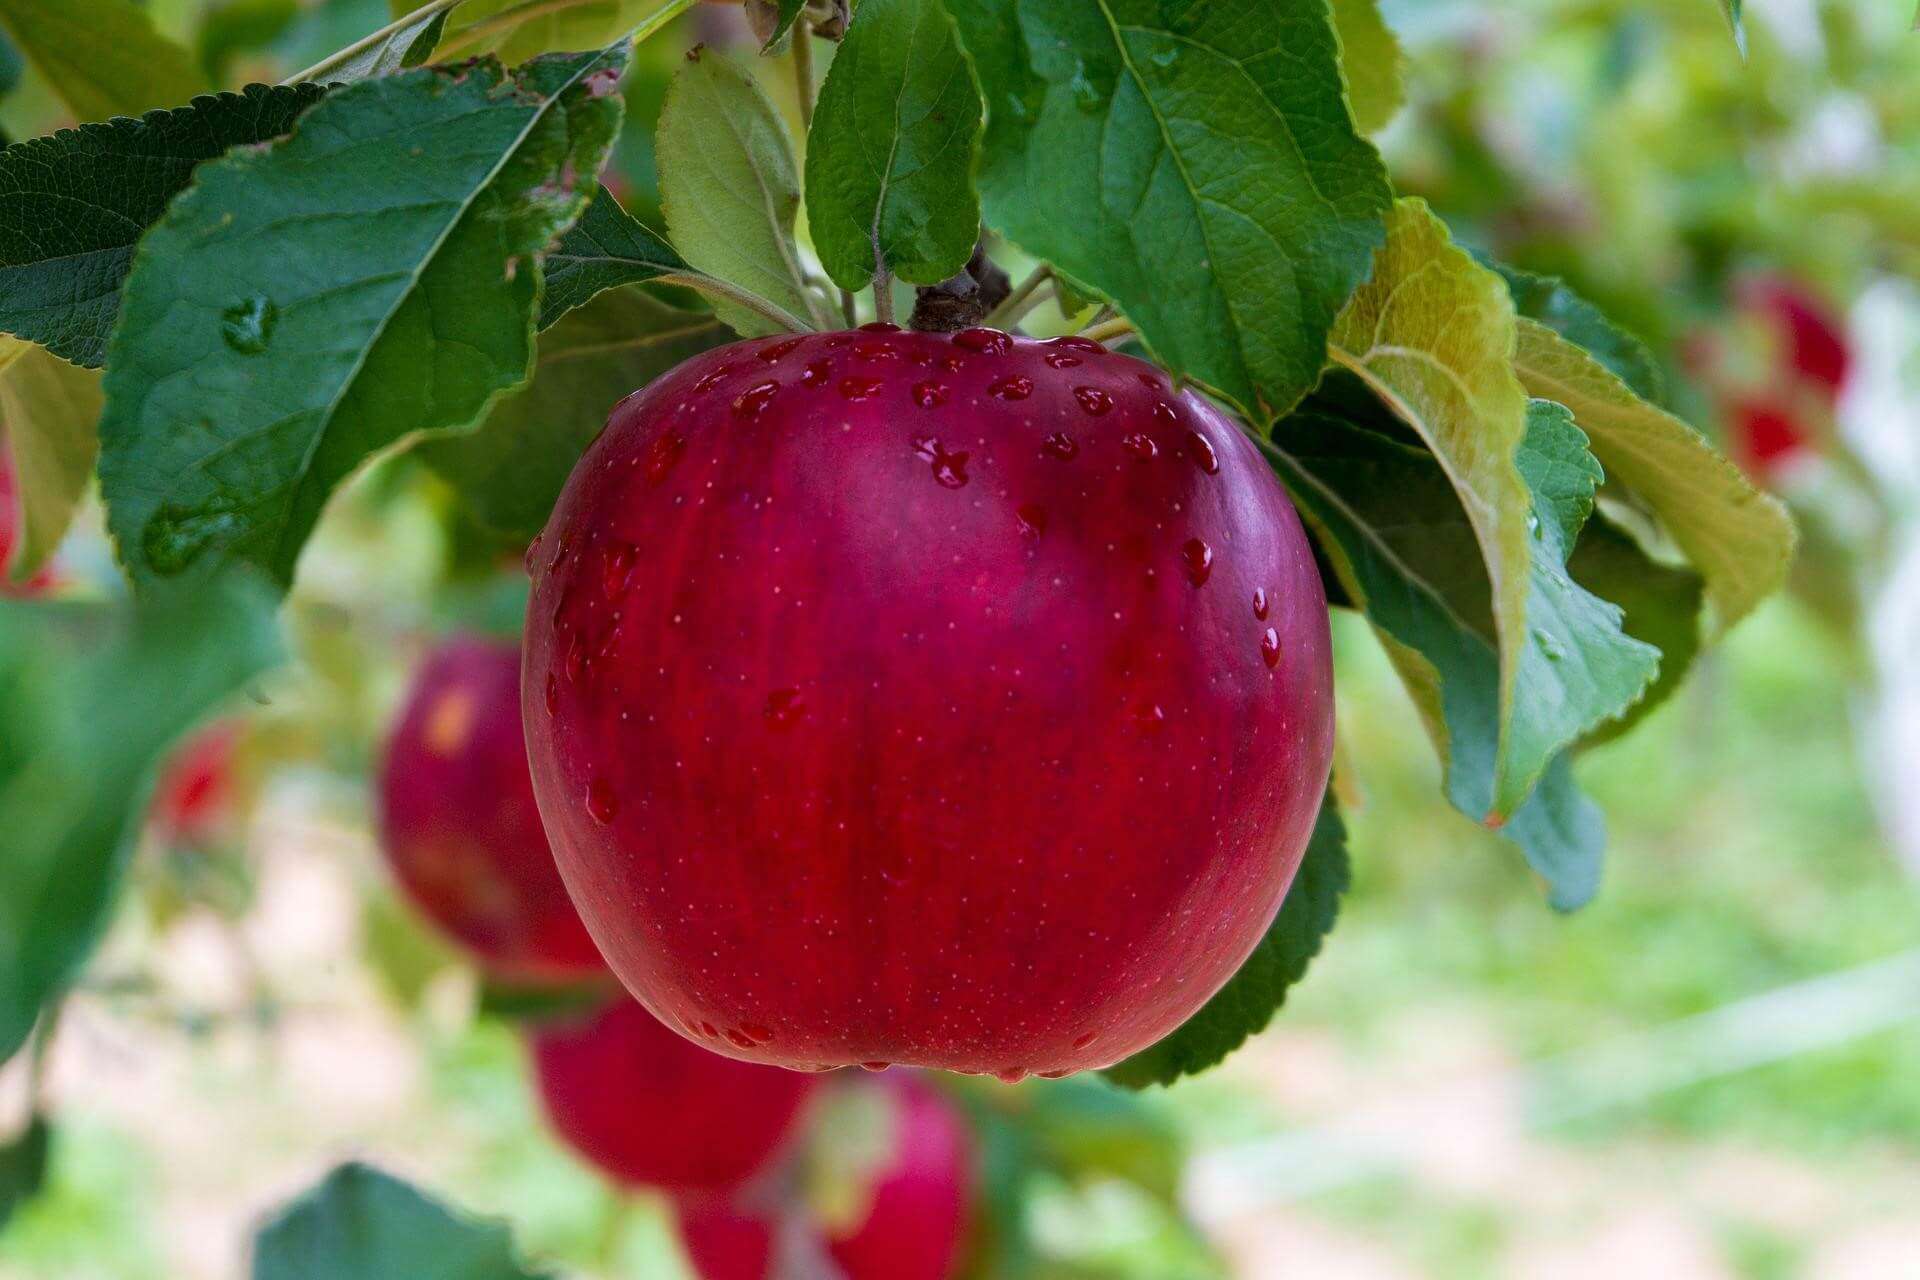 A close up of a red apple hanging from a tree